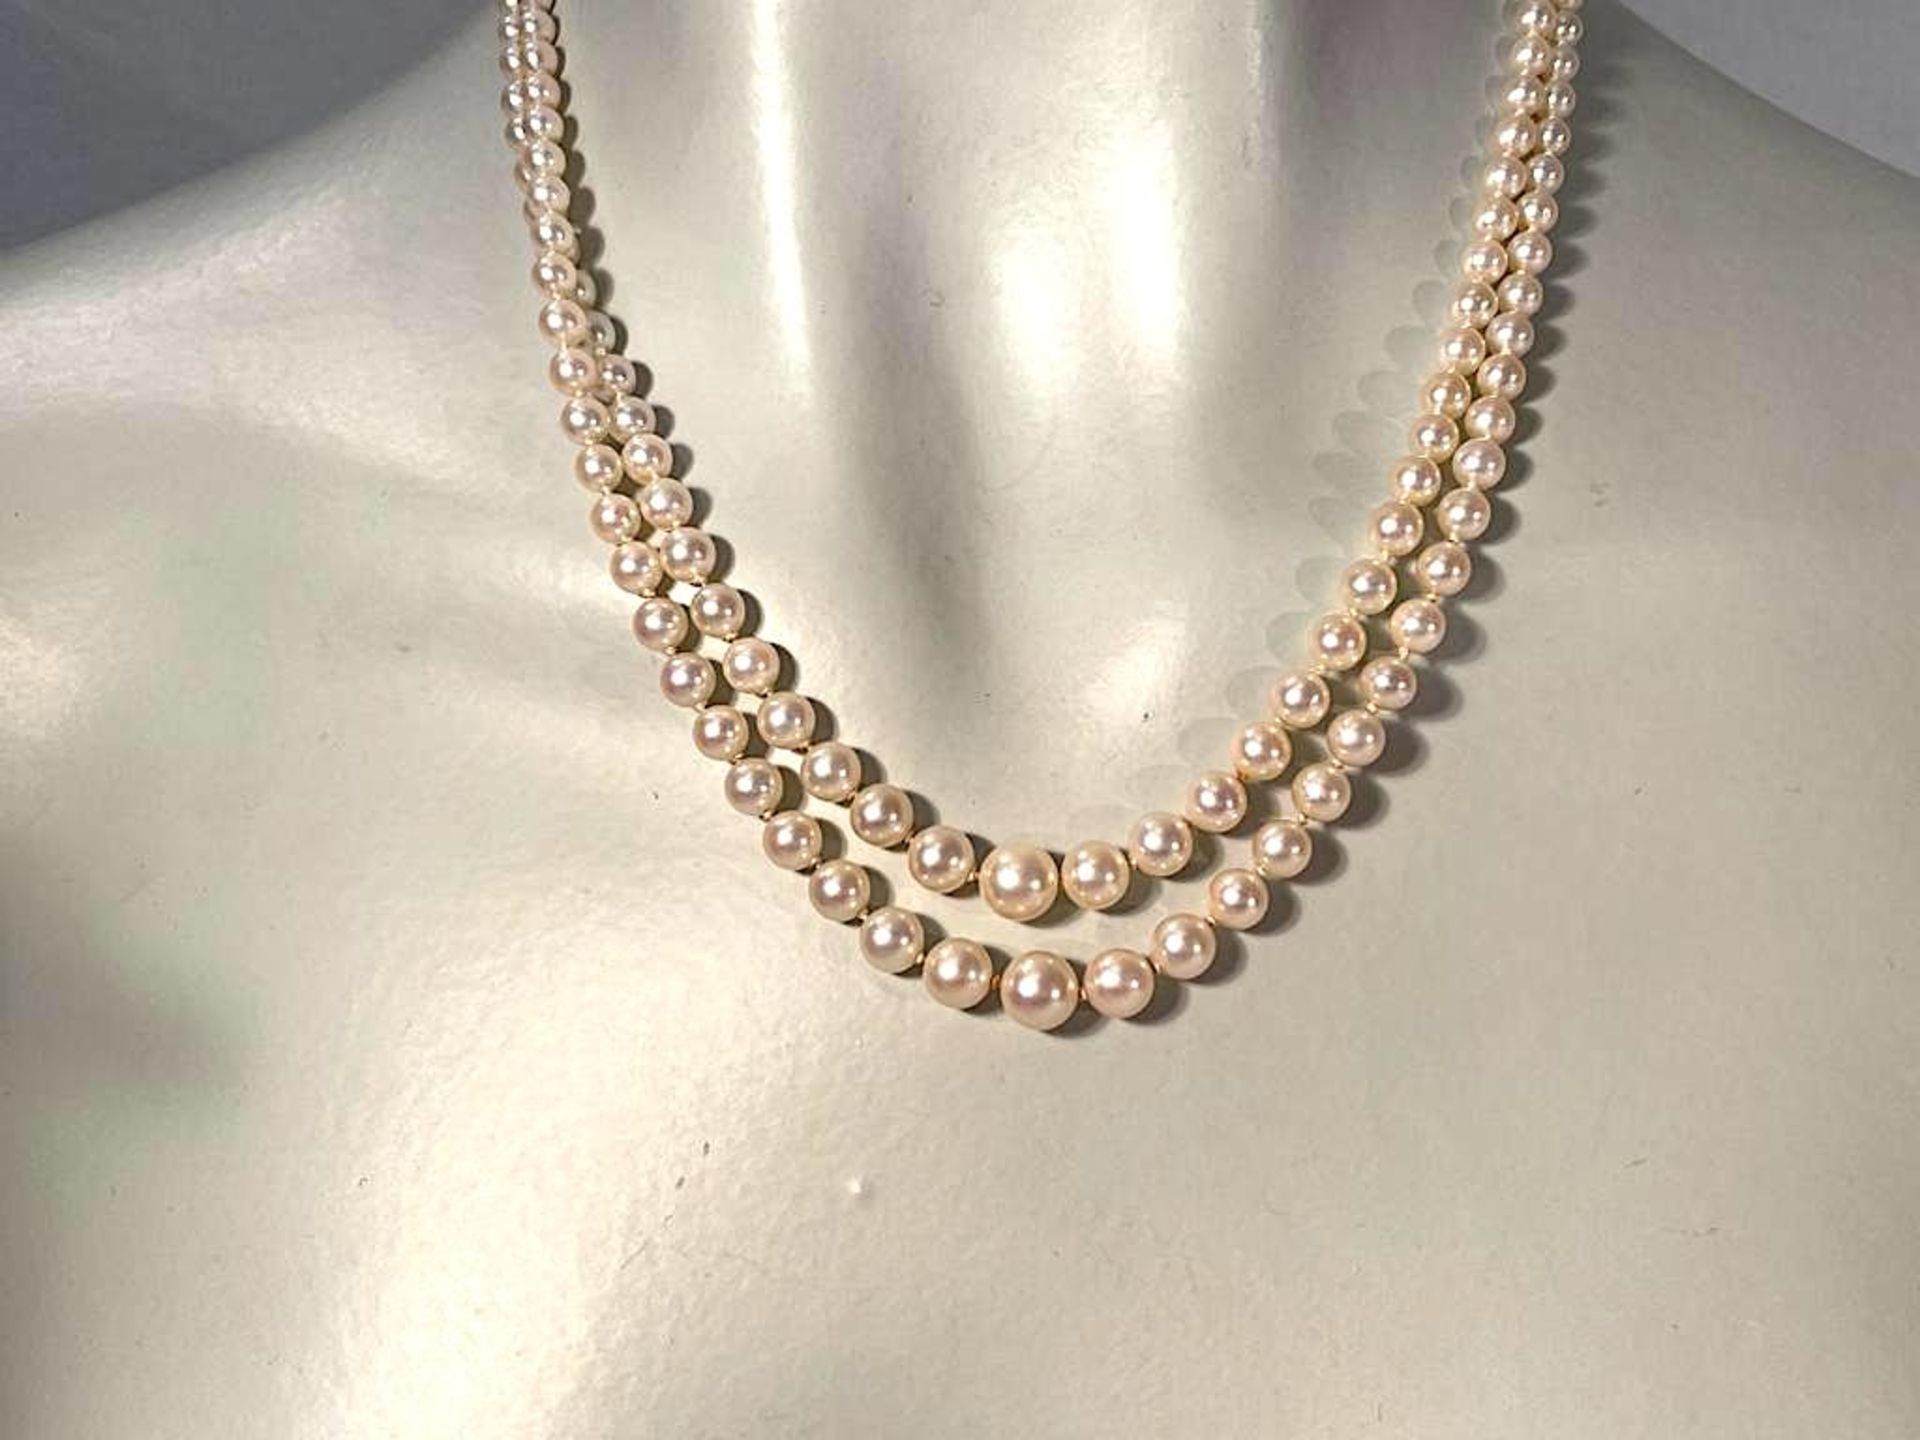 Pearl necklace - Image 5 of 10